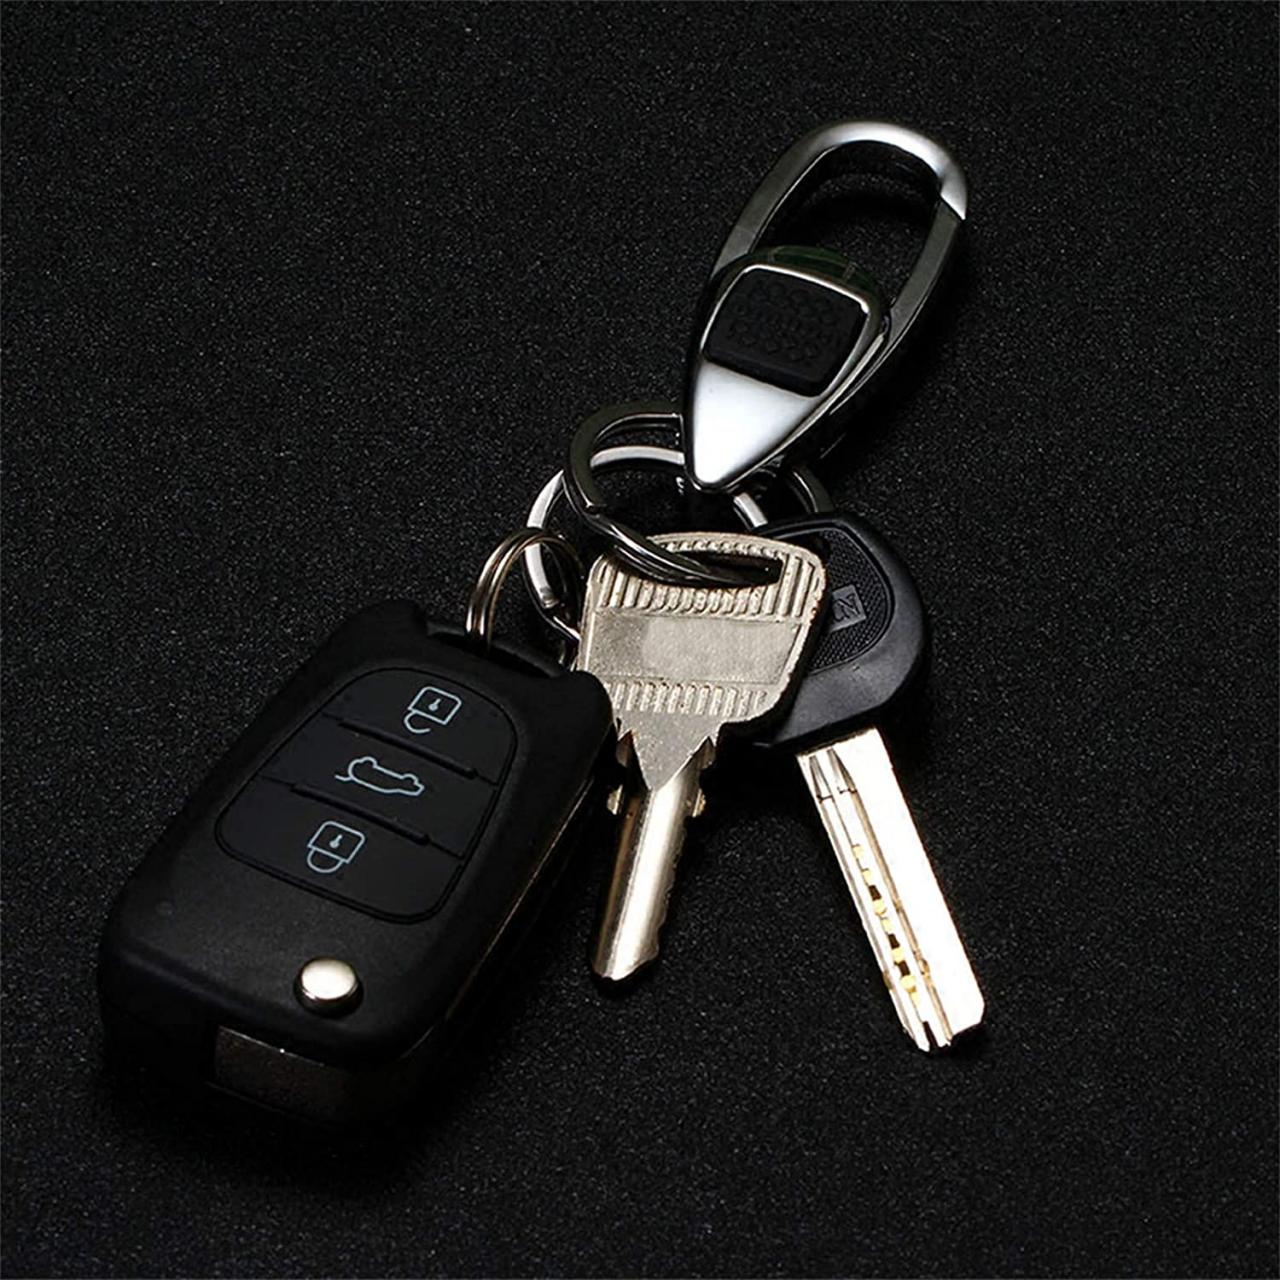 Buy Lancher Key chain with (2 Extra Key Rings and Gift Box) Big Key Clip  Durable Car Keychain for Men and Women Online in Hong Kong. B078TLY2JJ